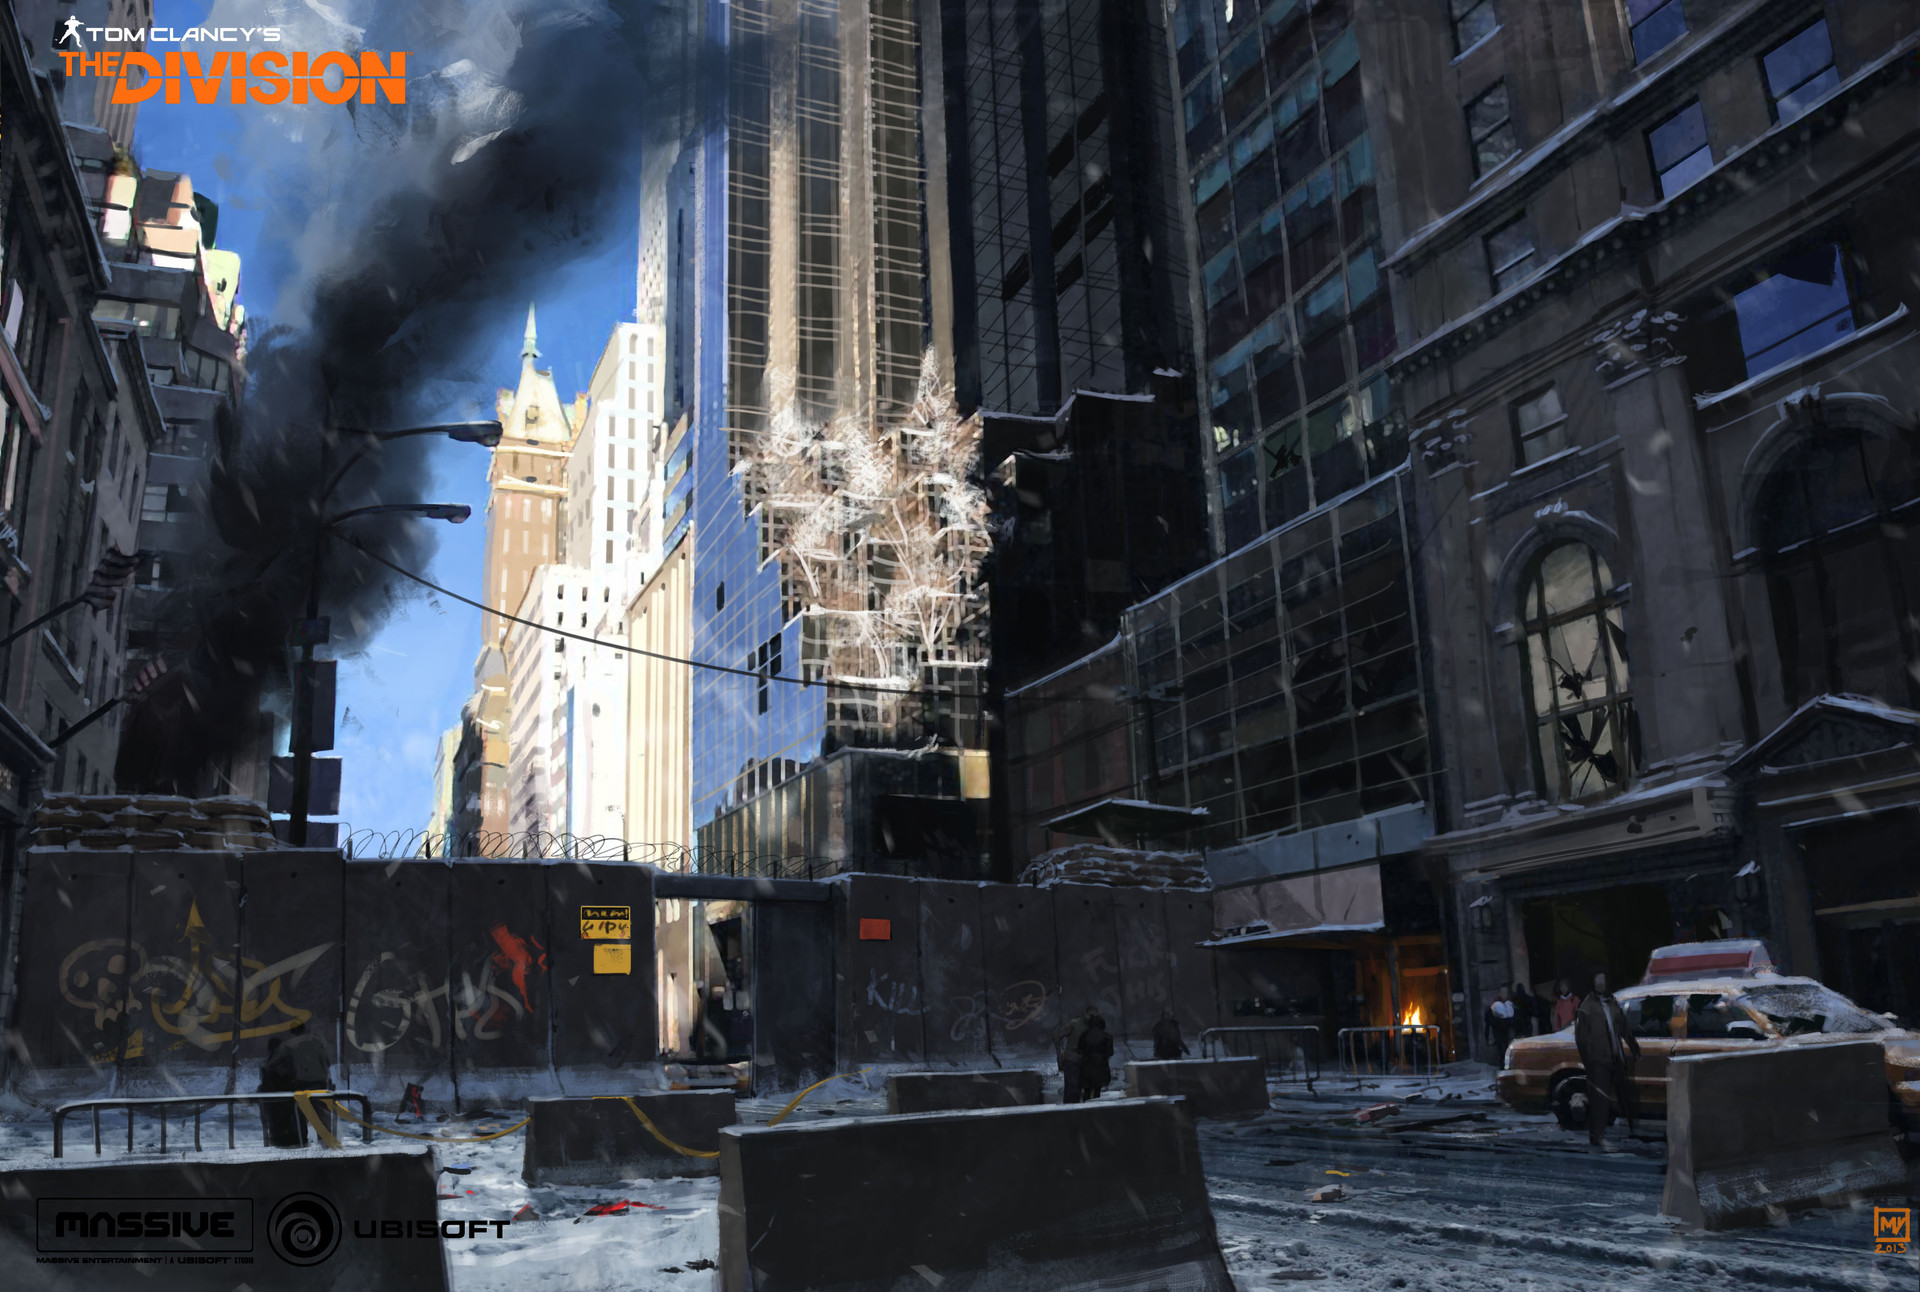 Fine Art: The Division: Destroying Faces Since 2016